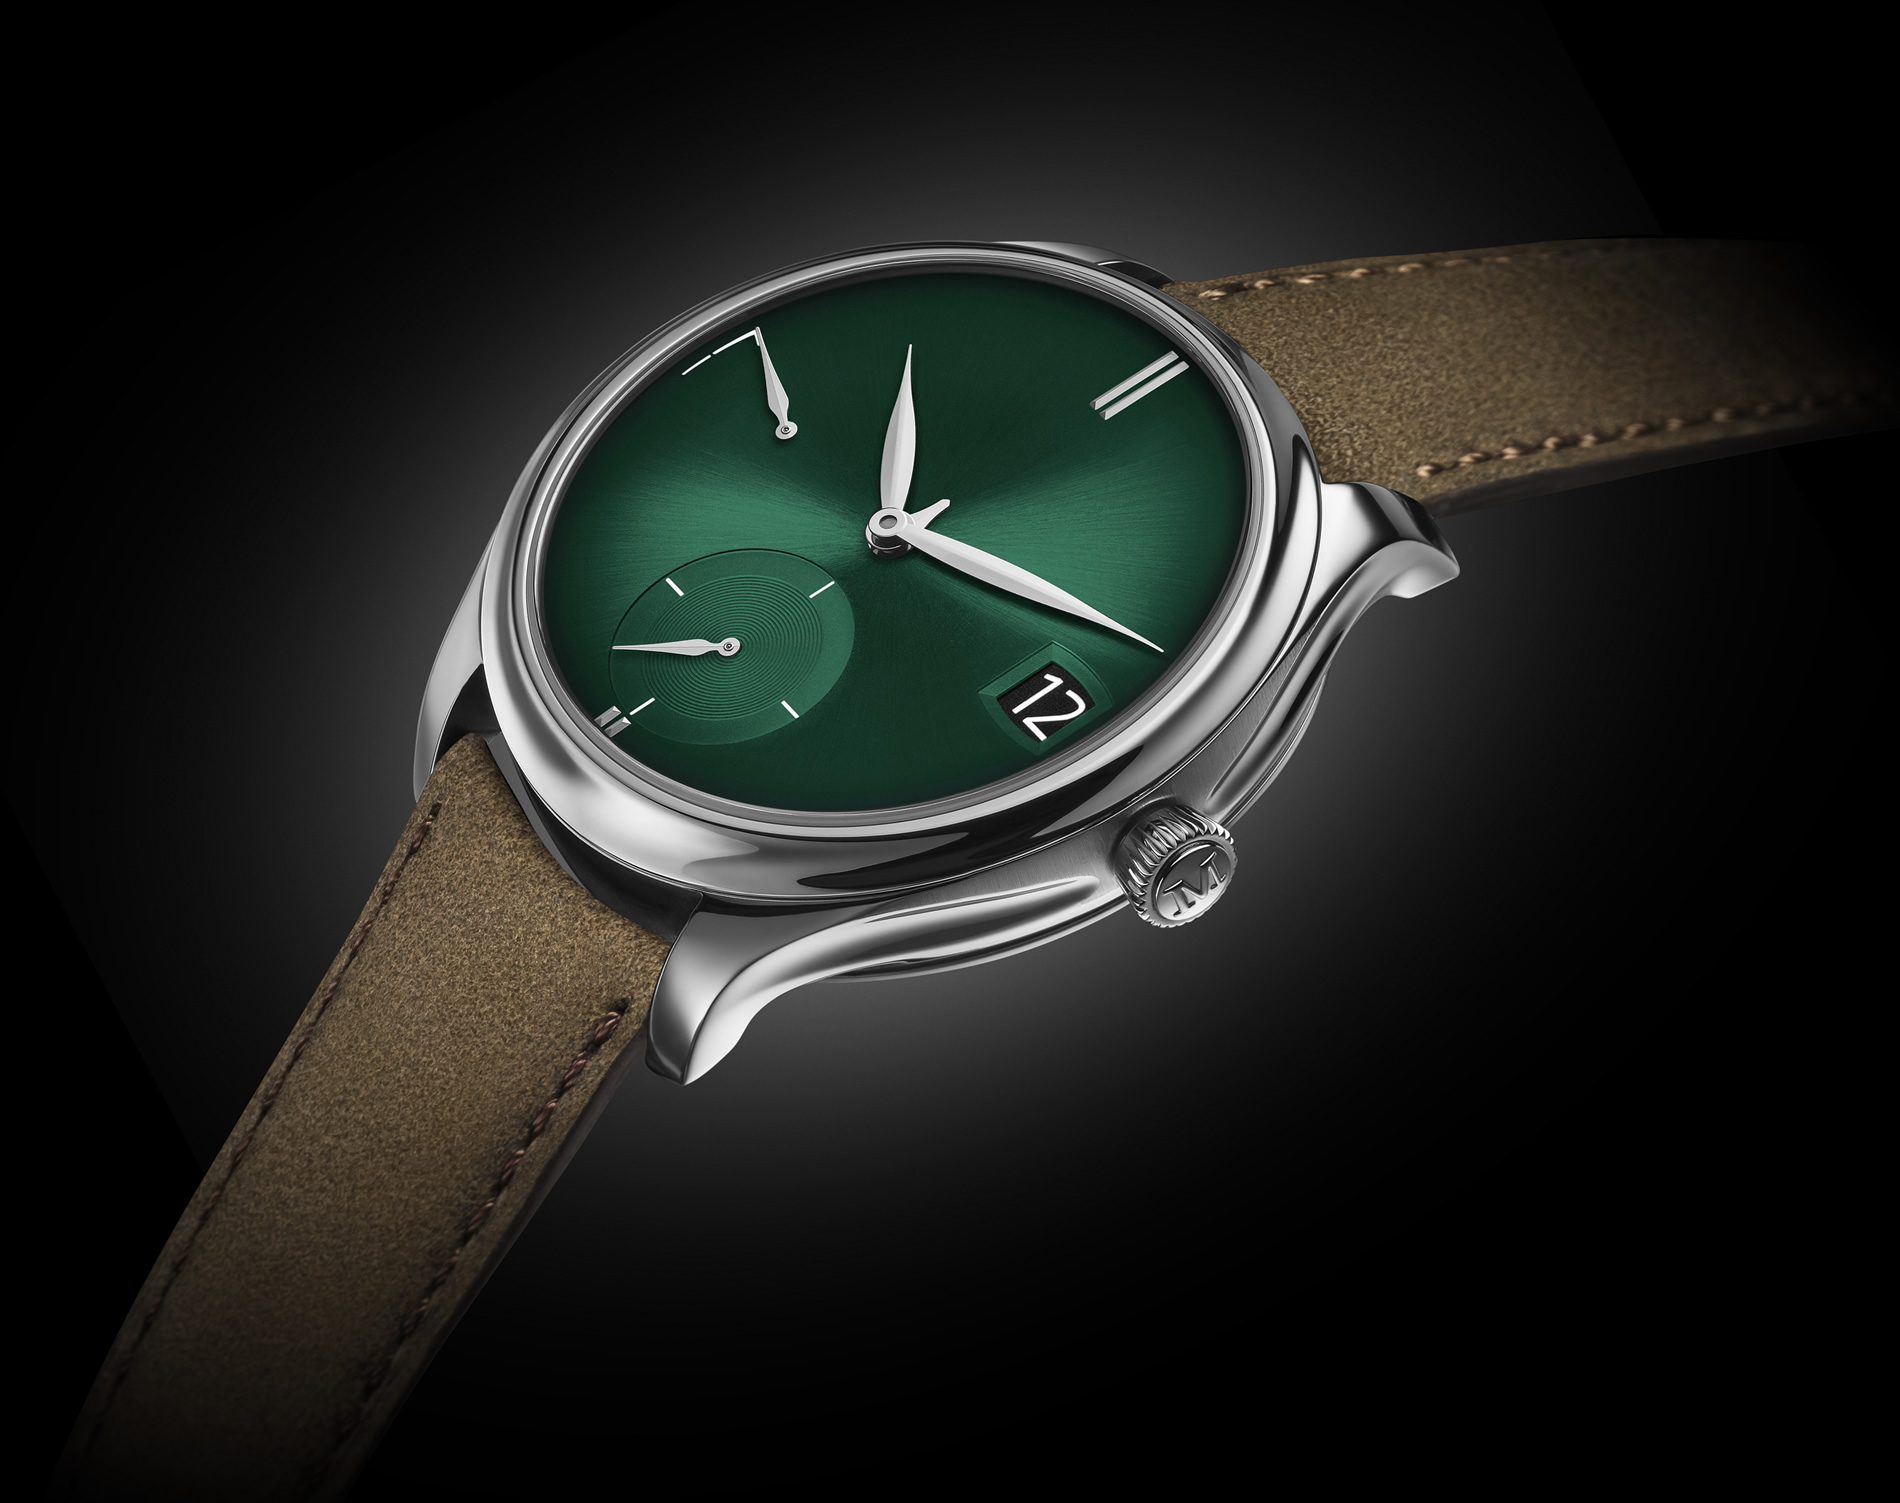 SIMPLE, EFFECTIVE, UNDERSTATED, AUTHENTIC: THE ENDEAVOUR PERPETUAL CALENDAR PURITY COSMIC GREEN FROM H. MOSER & CIE.